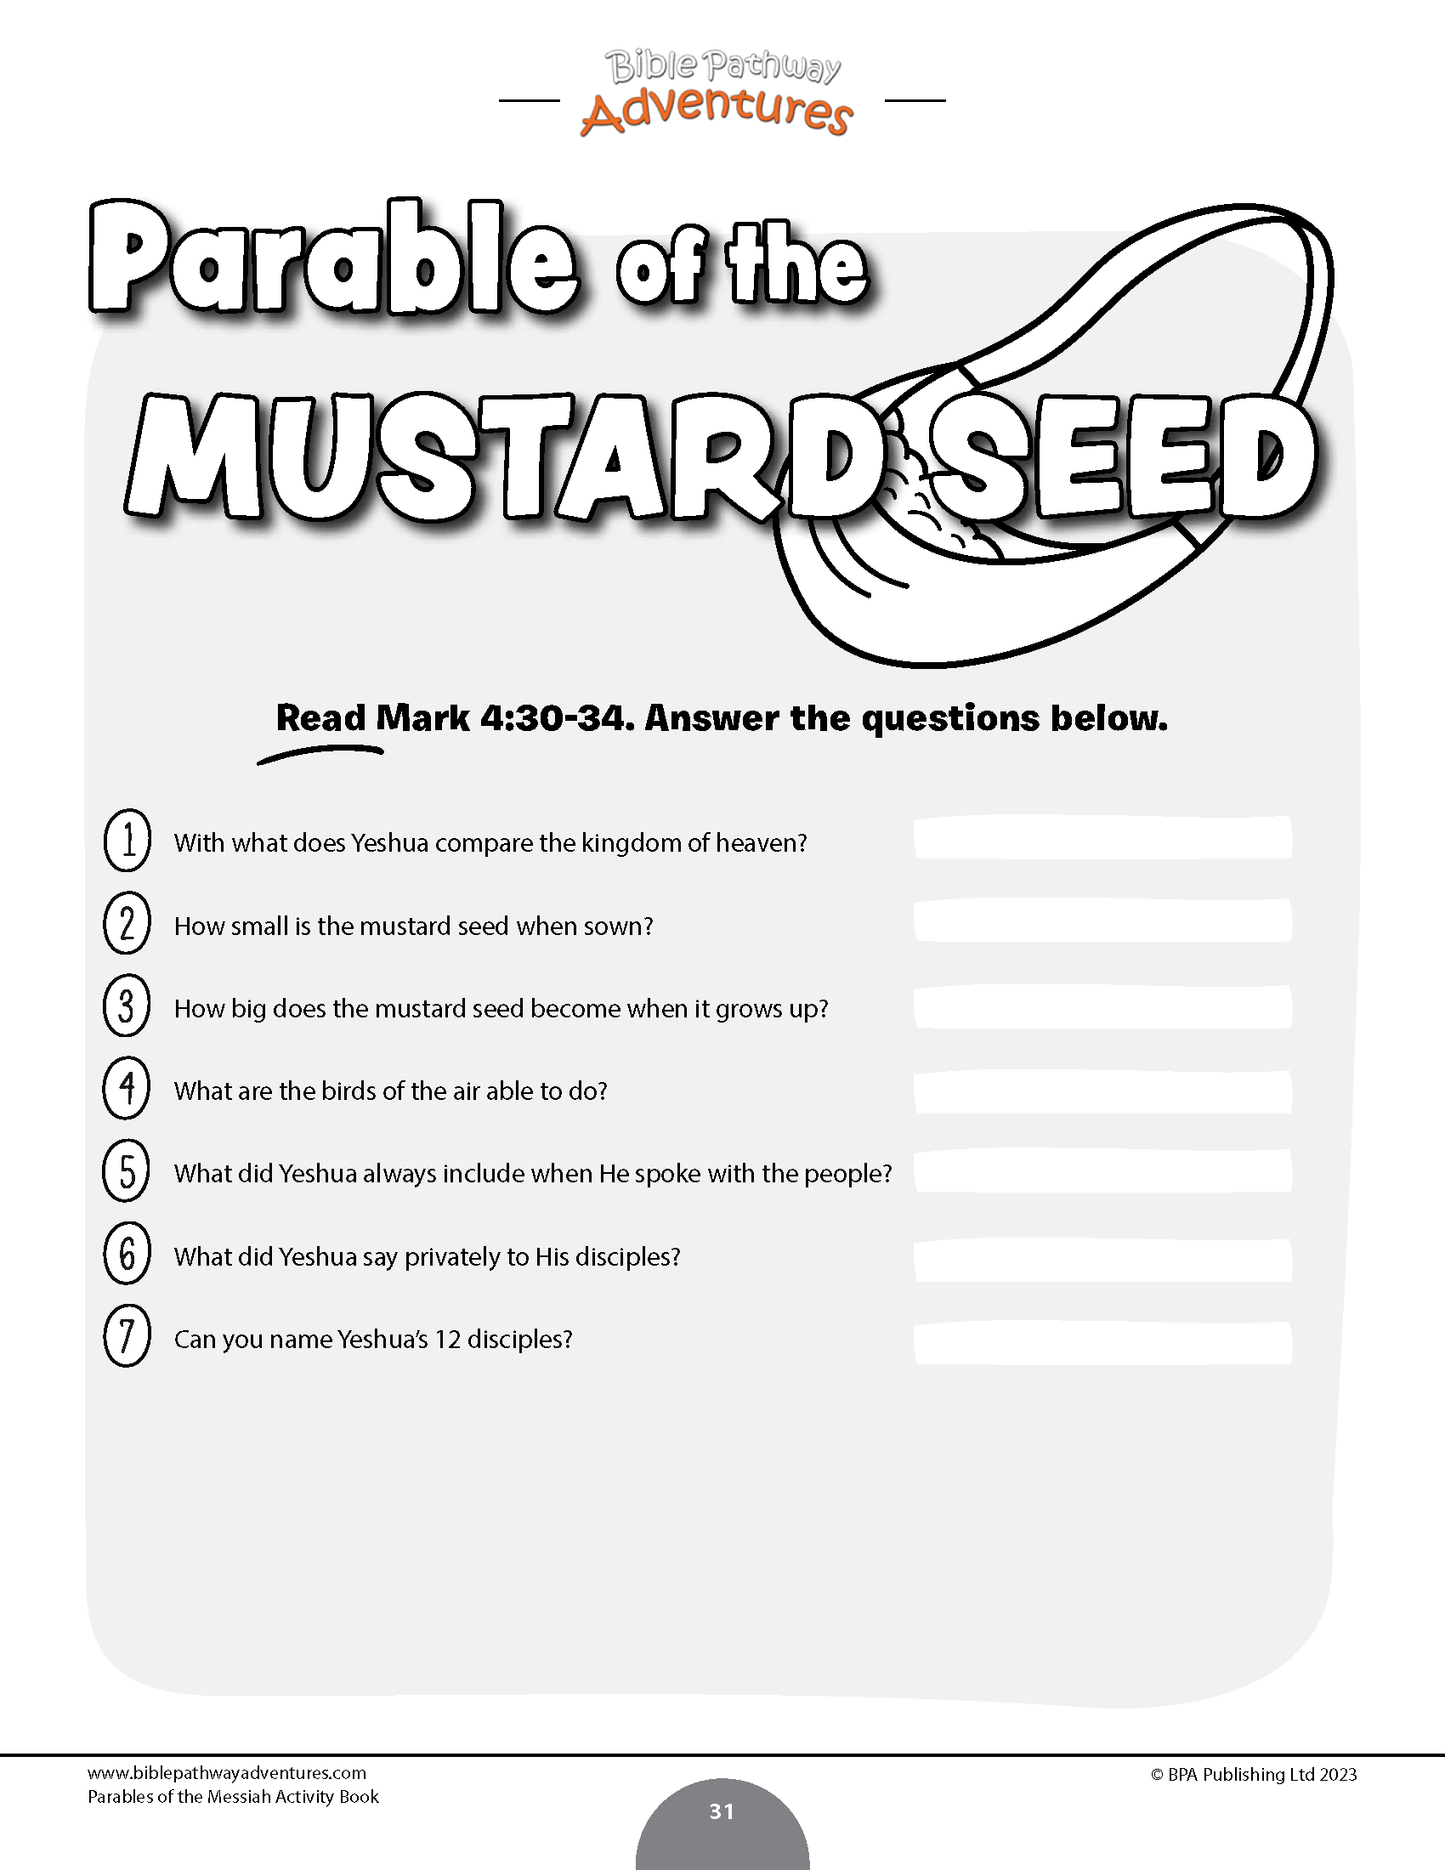 Parables of the Messiah Activity Book (PDF)